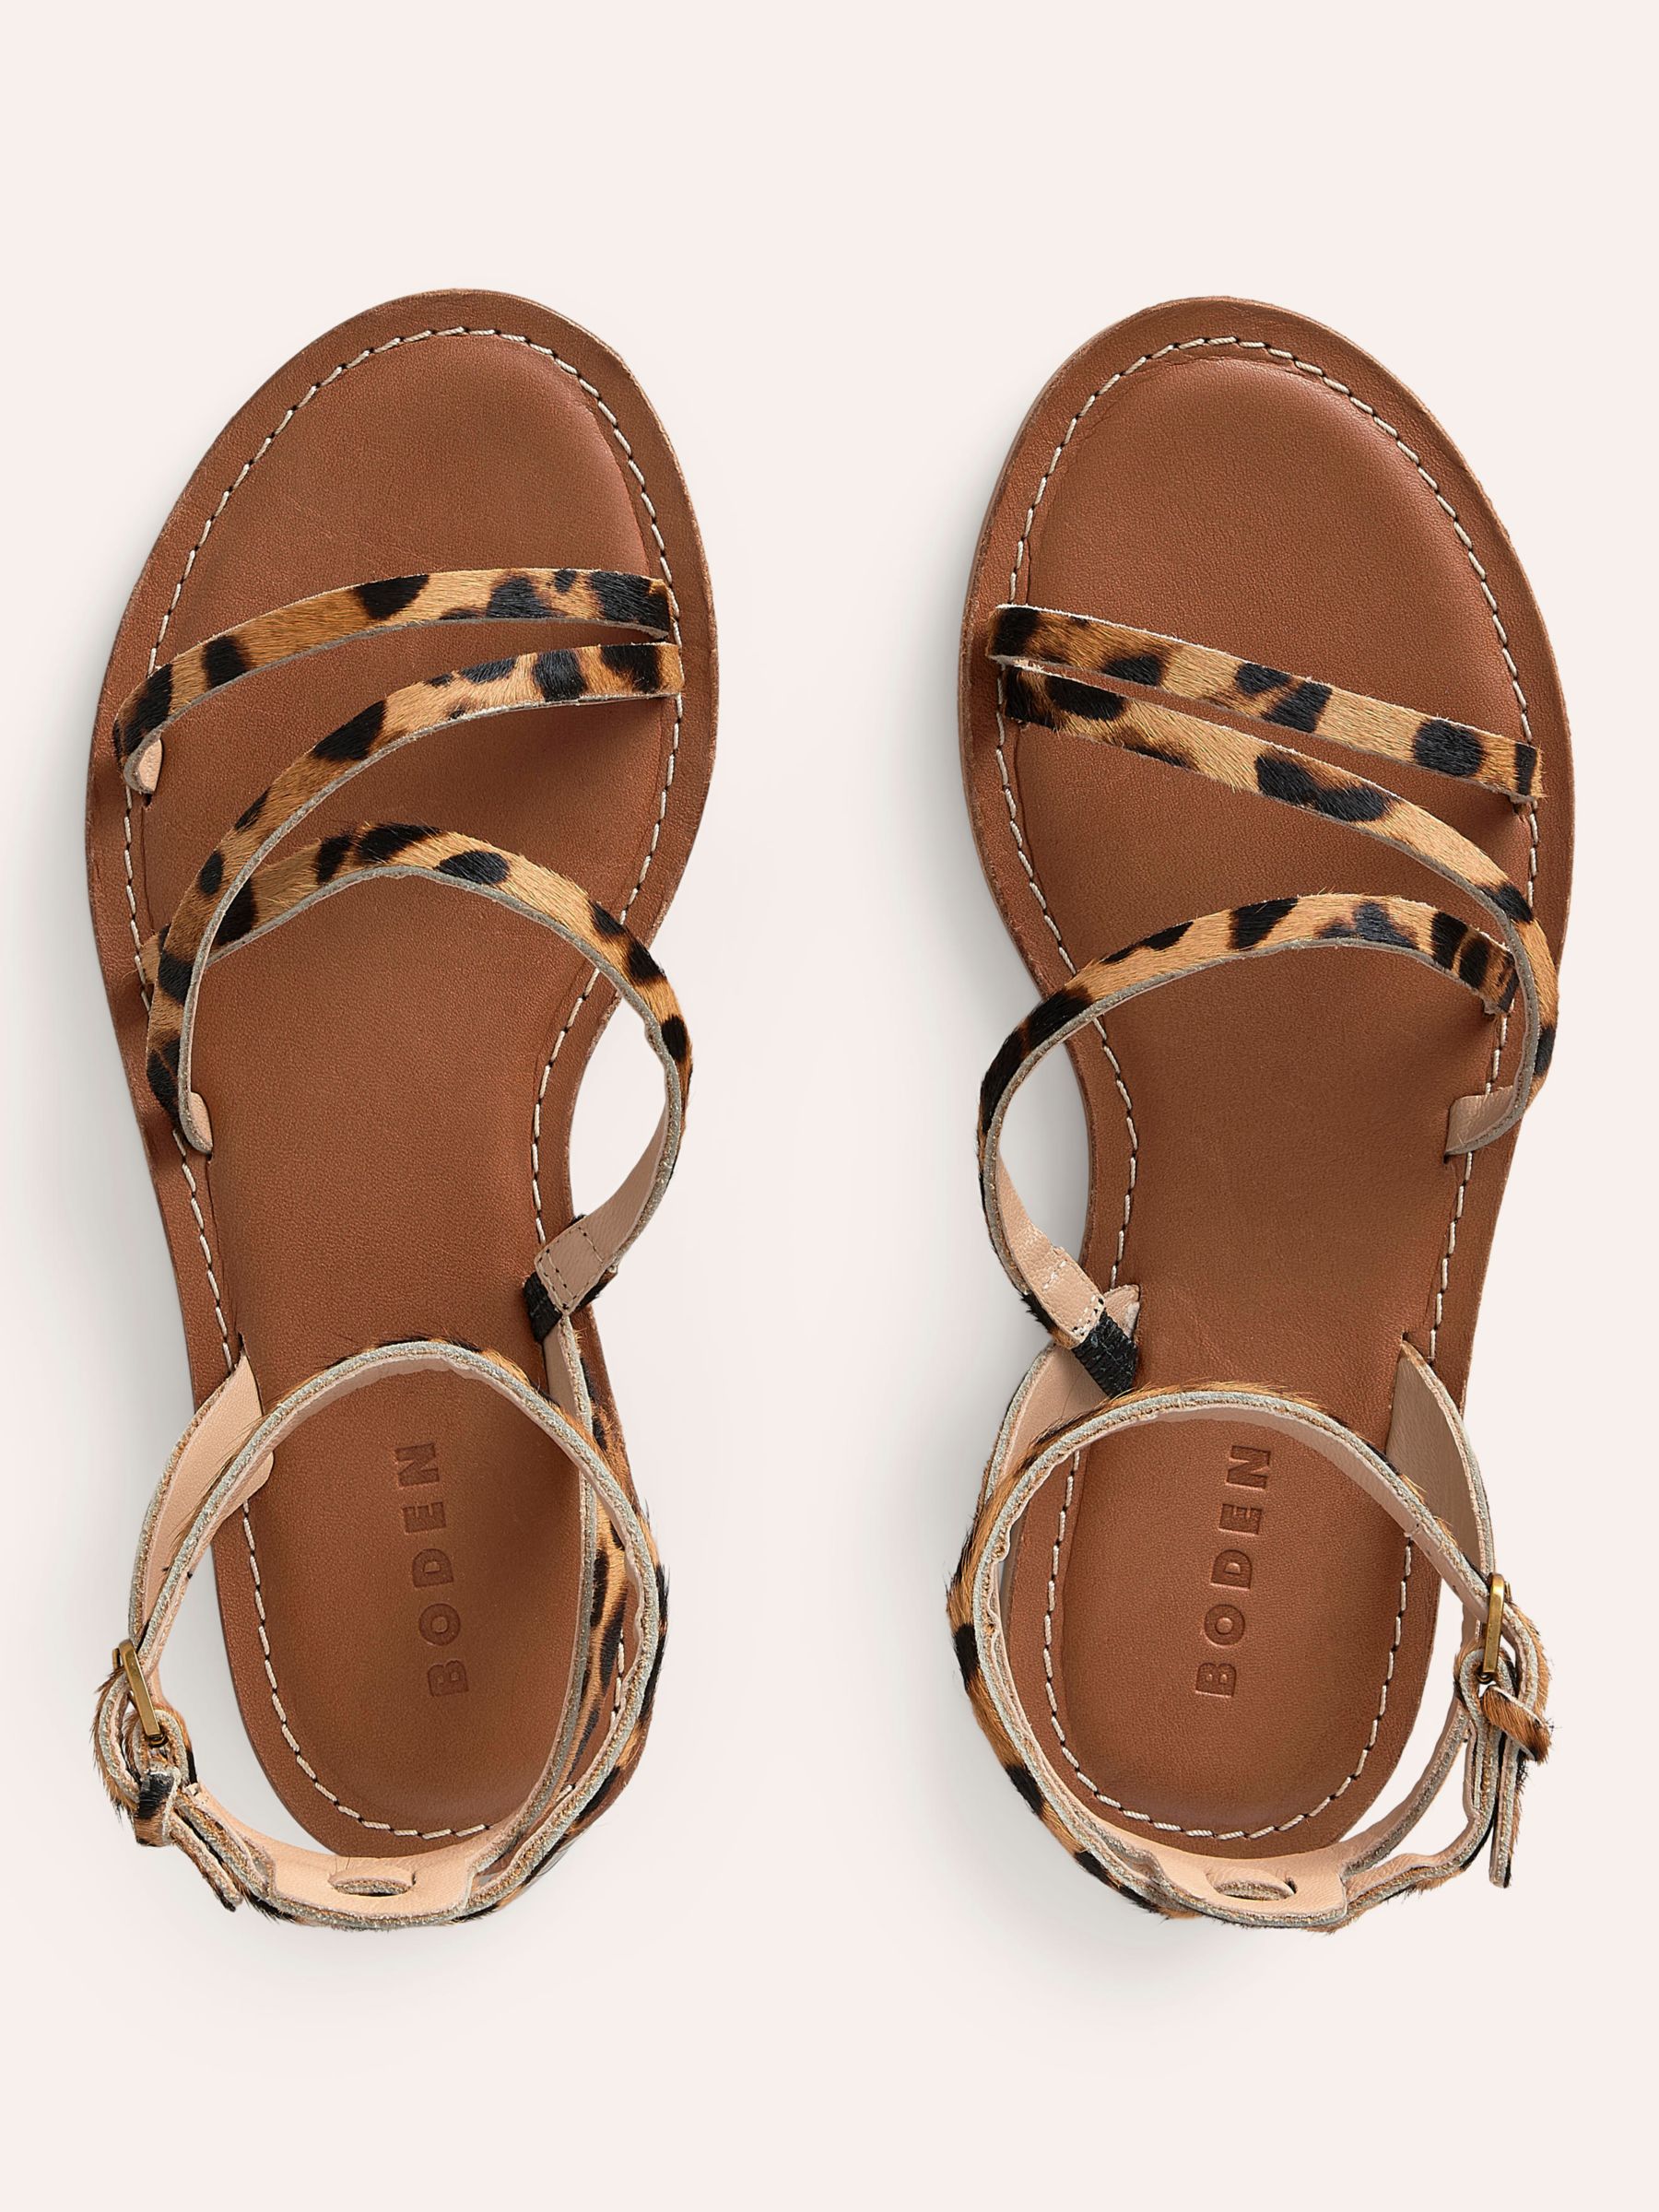 Buy Boden Everyday Flat Sandals, Classic Leopard Online at johnlewis.com